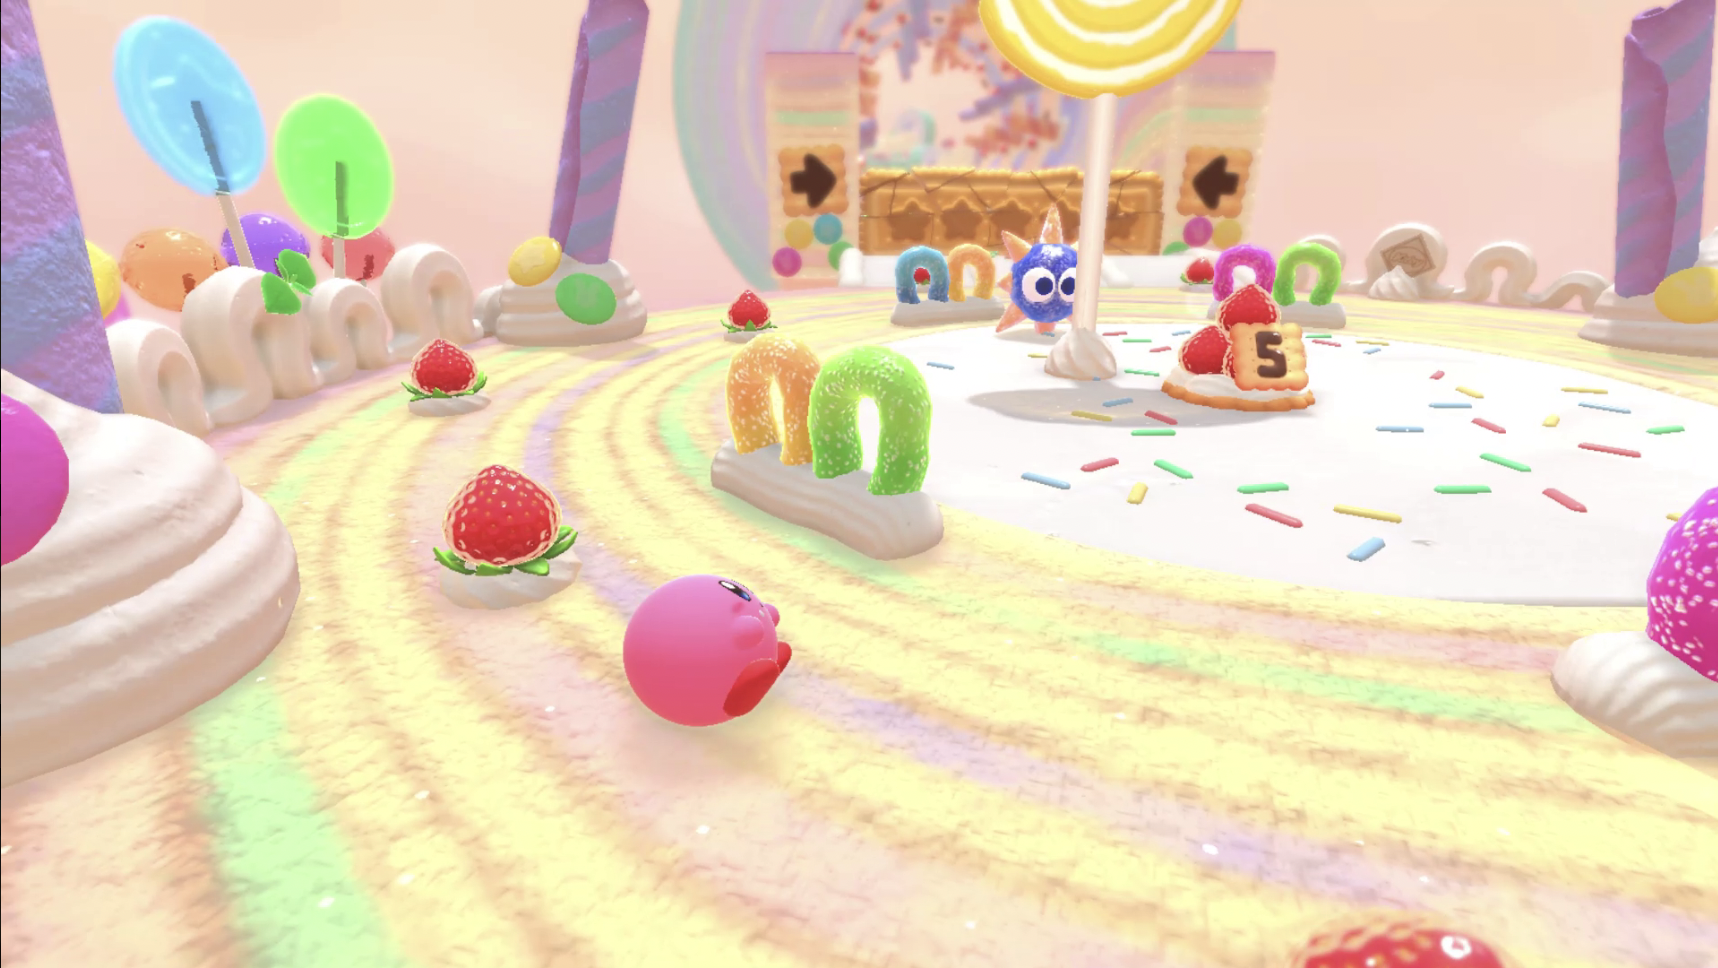 'Kirby's Dream Buffet': A Delectable Party Game